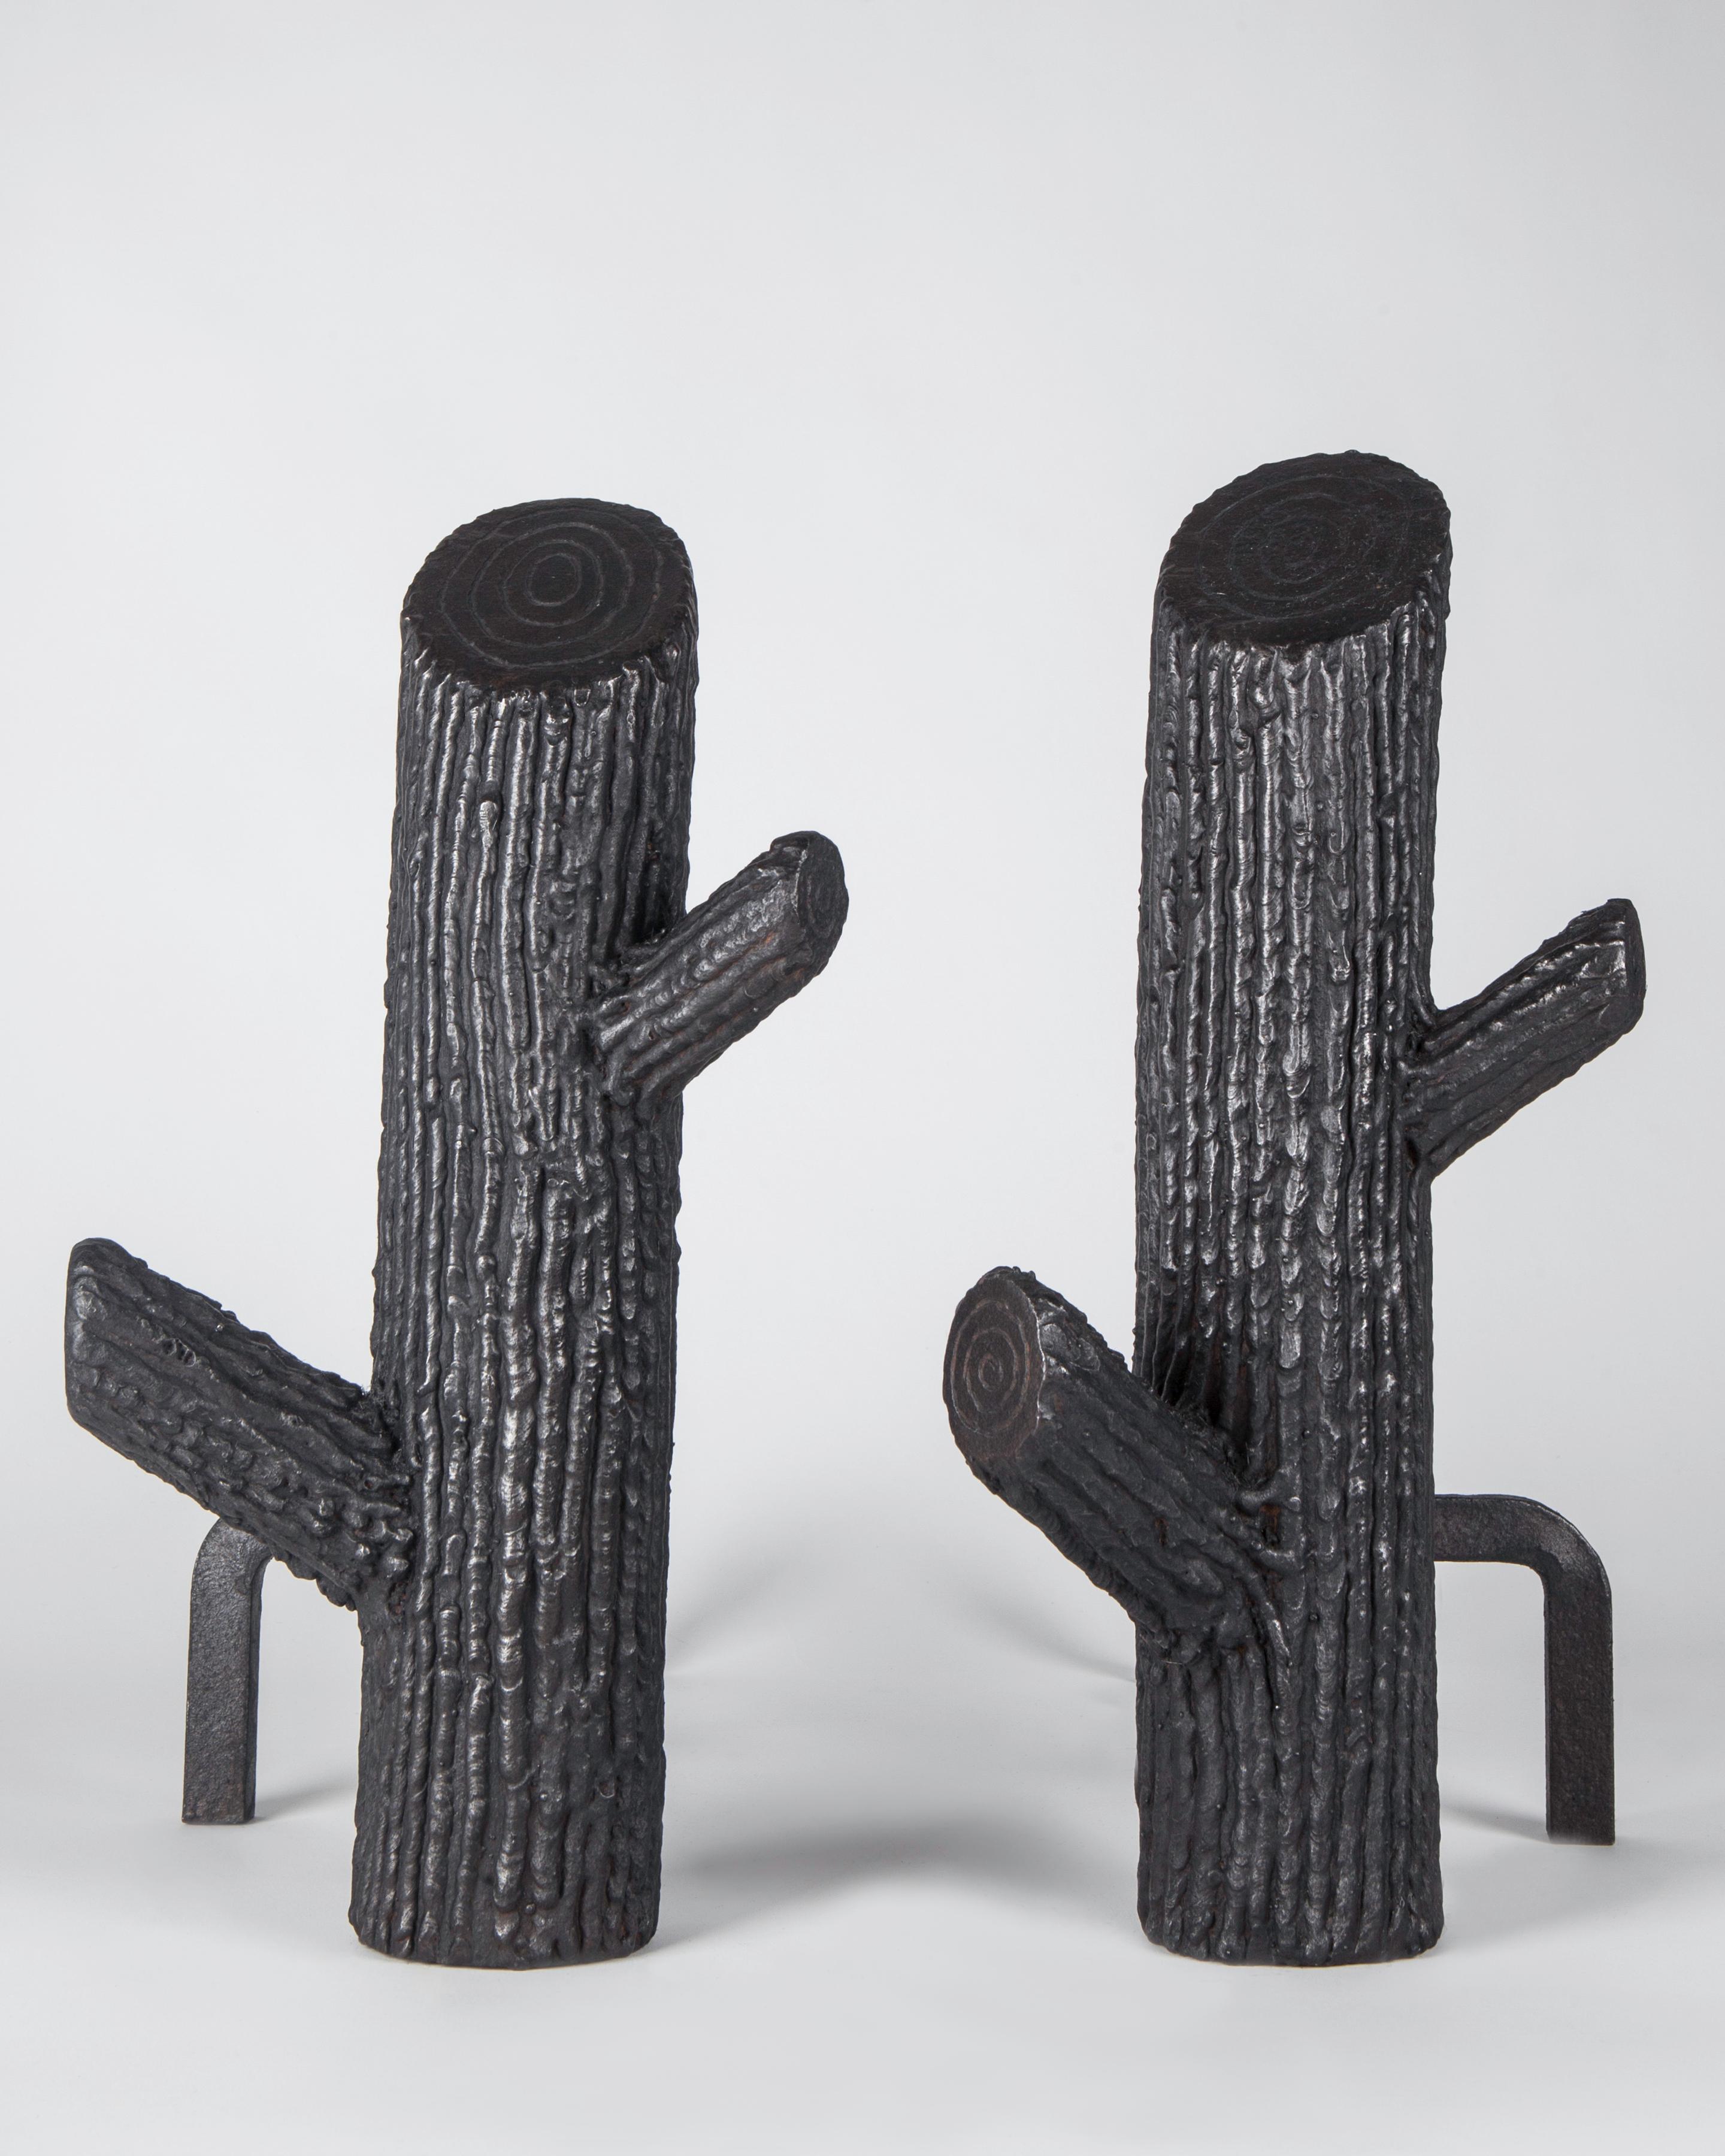 AFP0636
A pair of vintage blackened steel andirons in the form of tree trunks or cacti with two branches. The richly textured surface created by a clever method of laying down individual beads of weld to simulate tree bark.

Dimensions:
Overall: